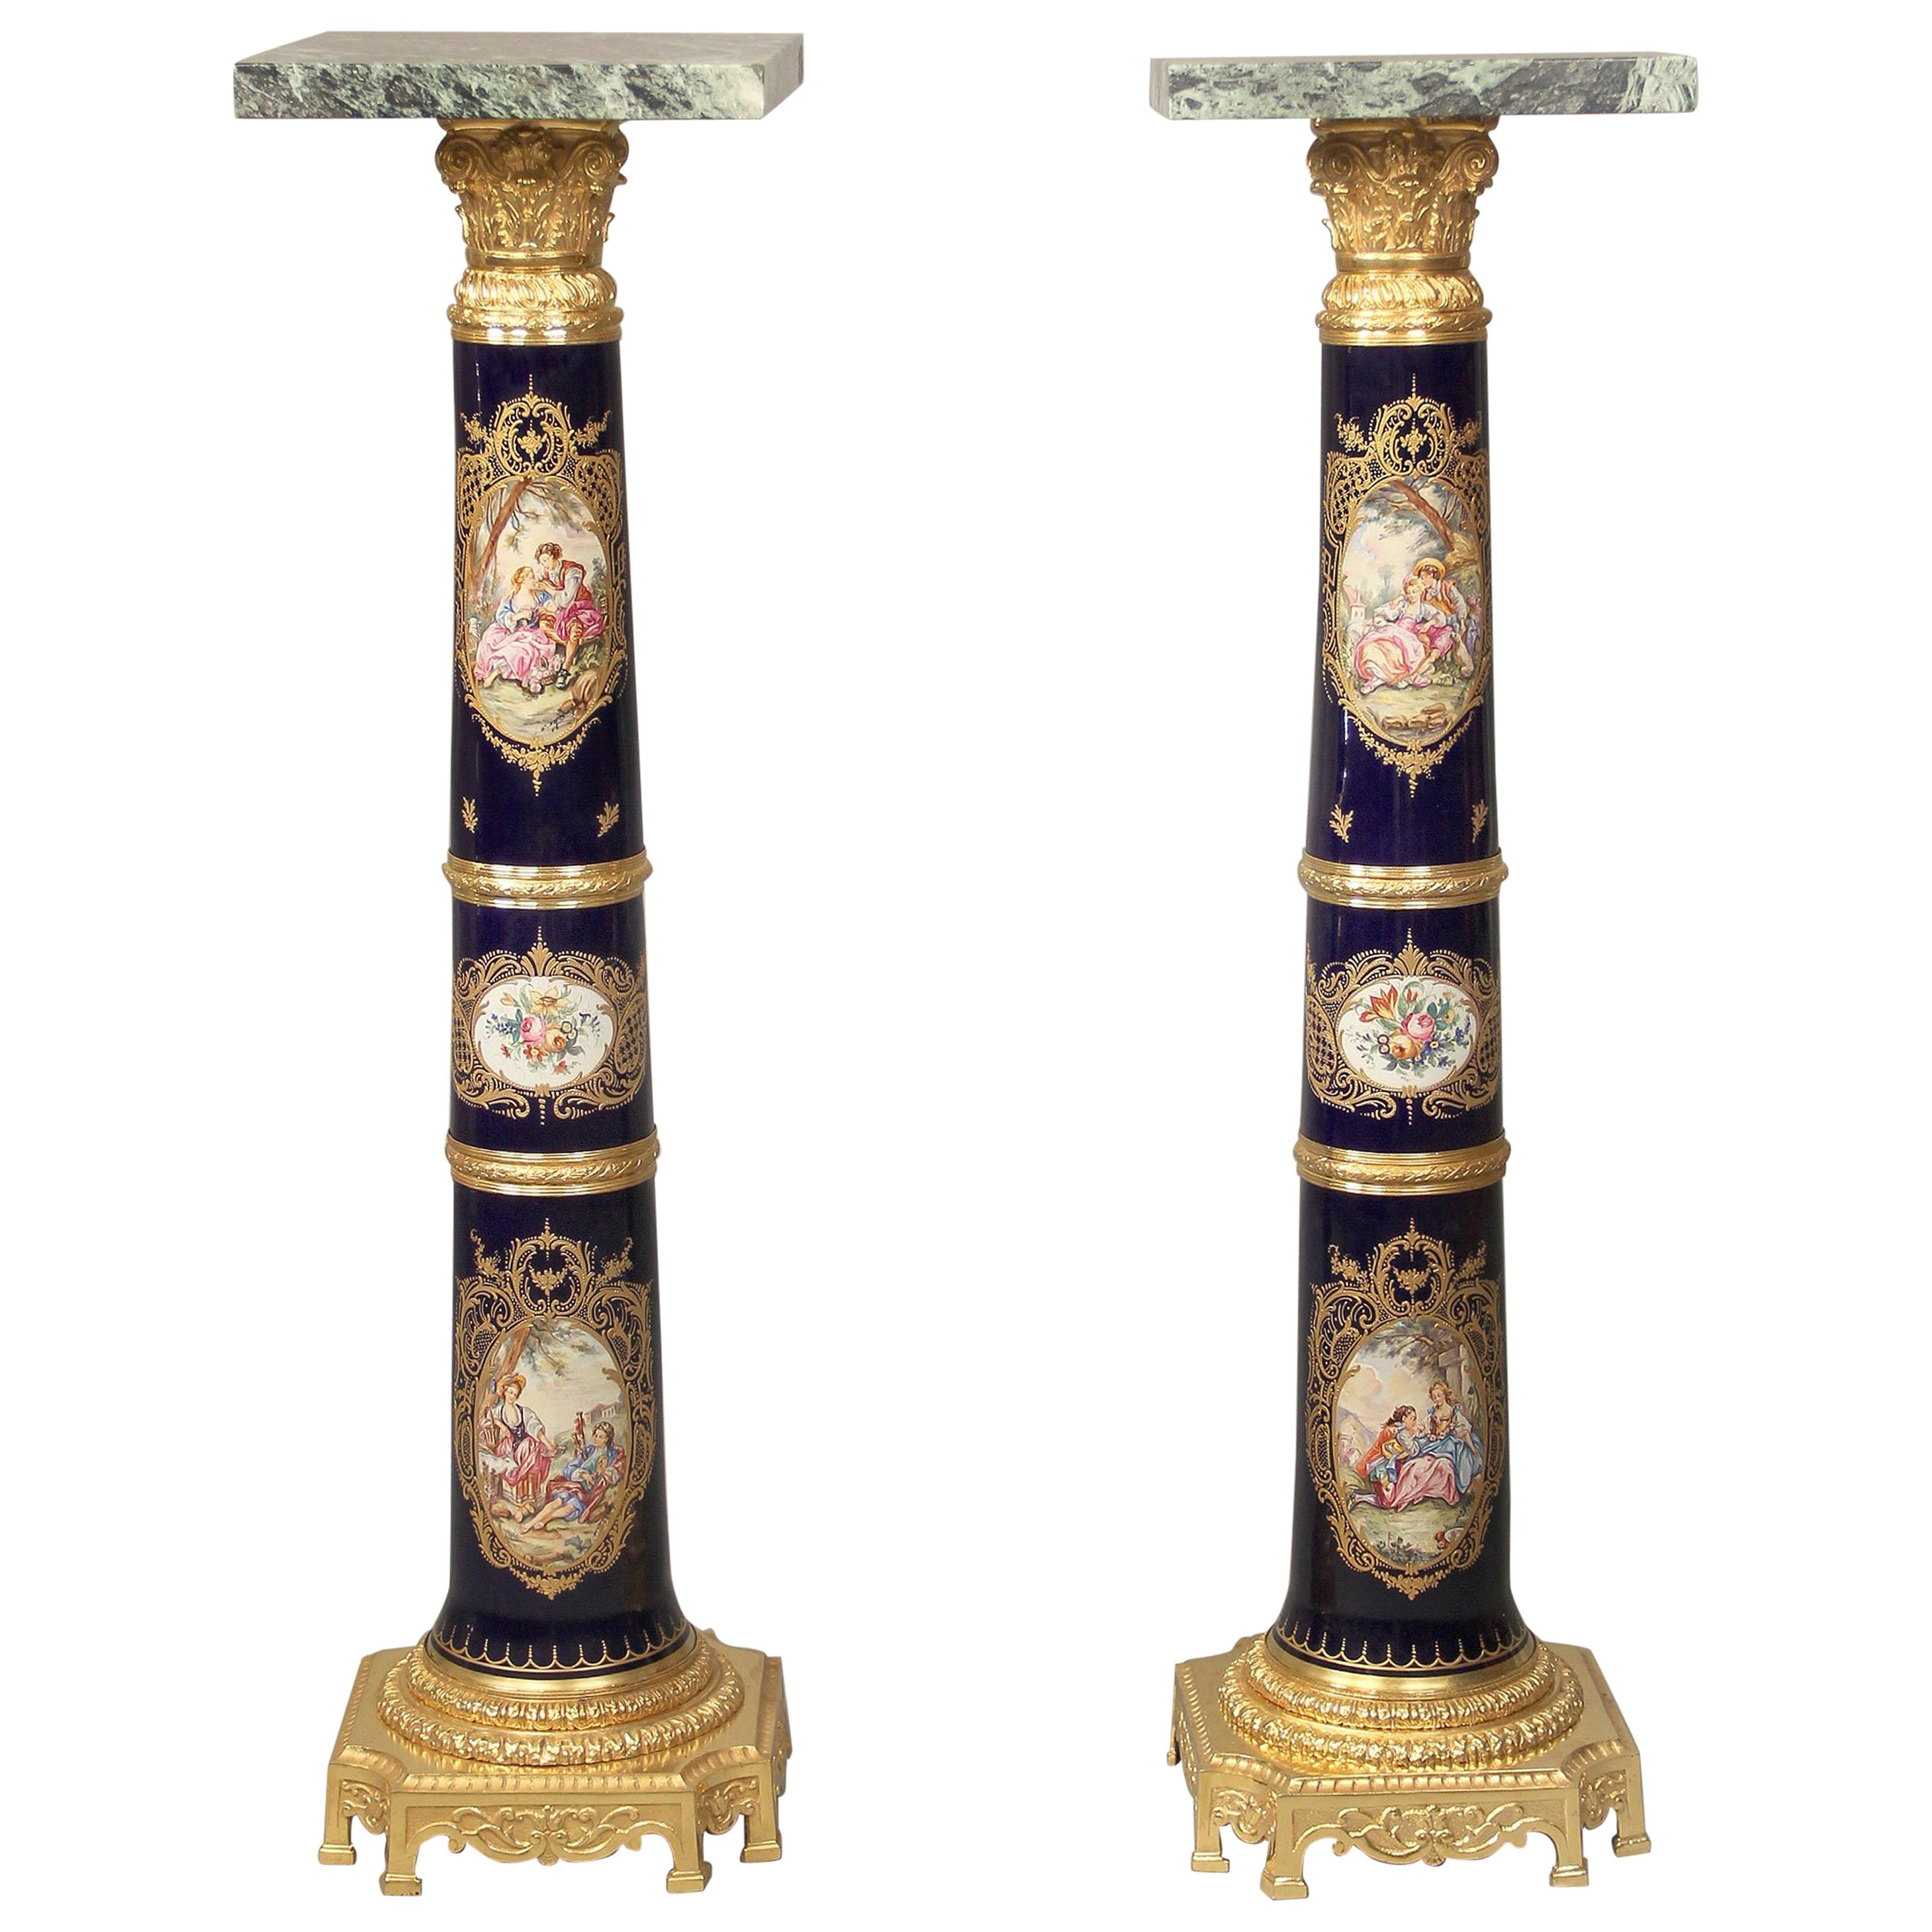 Pair of Late 19th Century Gilt Bronze-Mounted Sèvres Style Pedestals